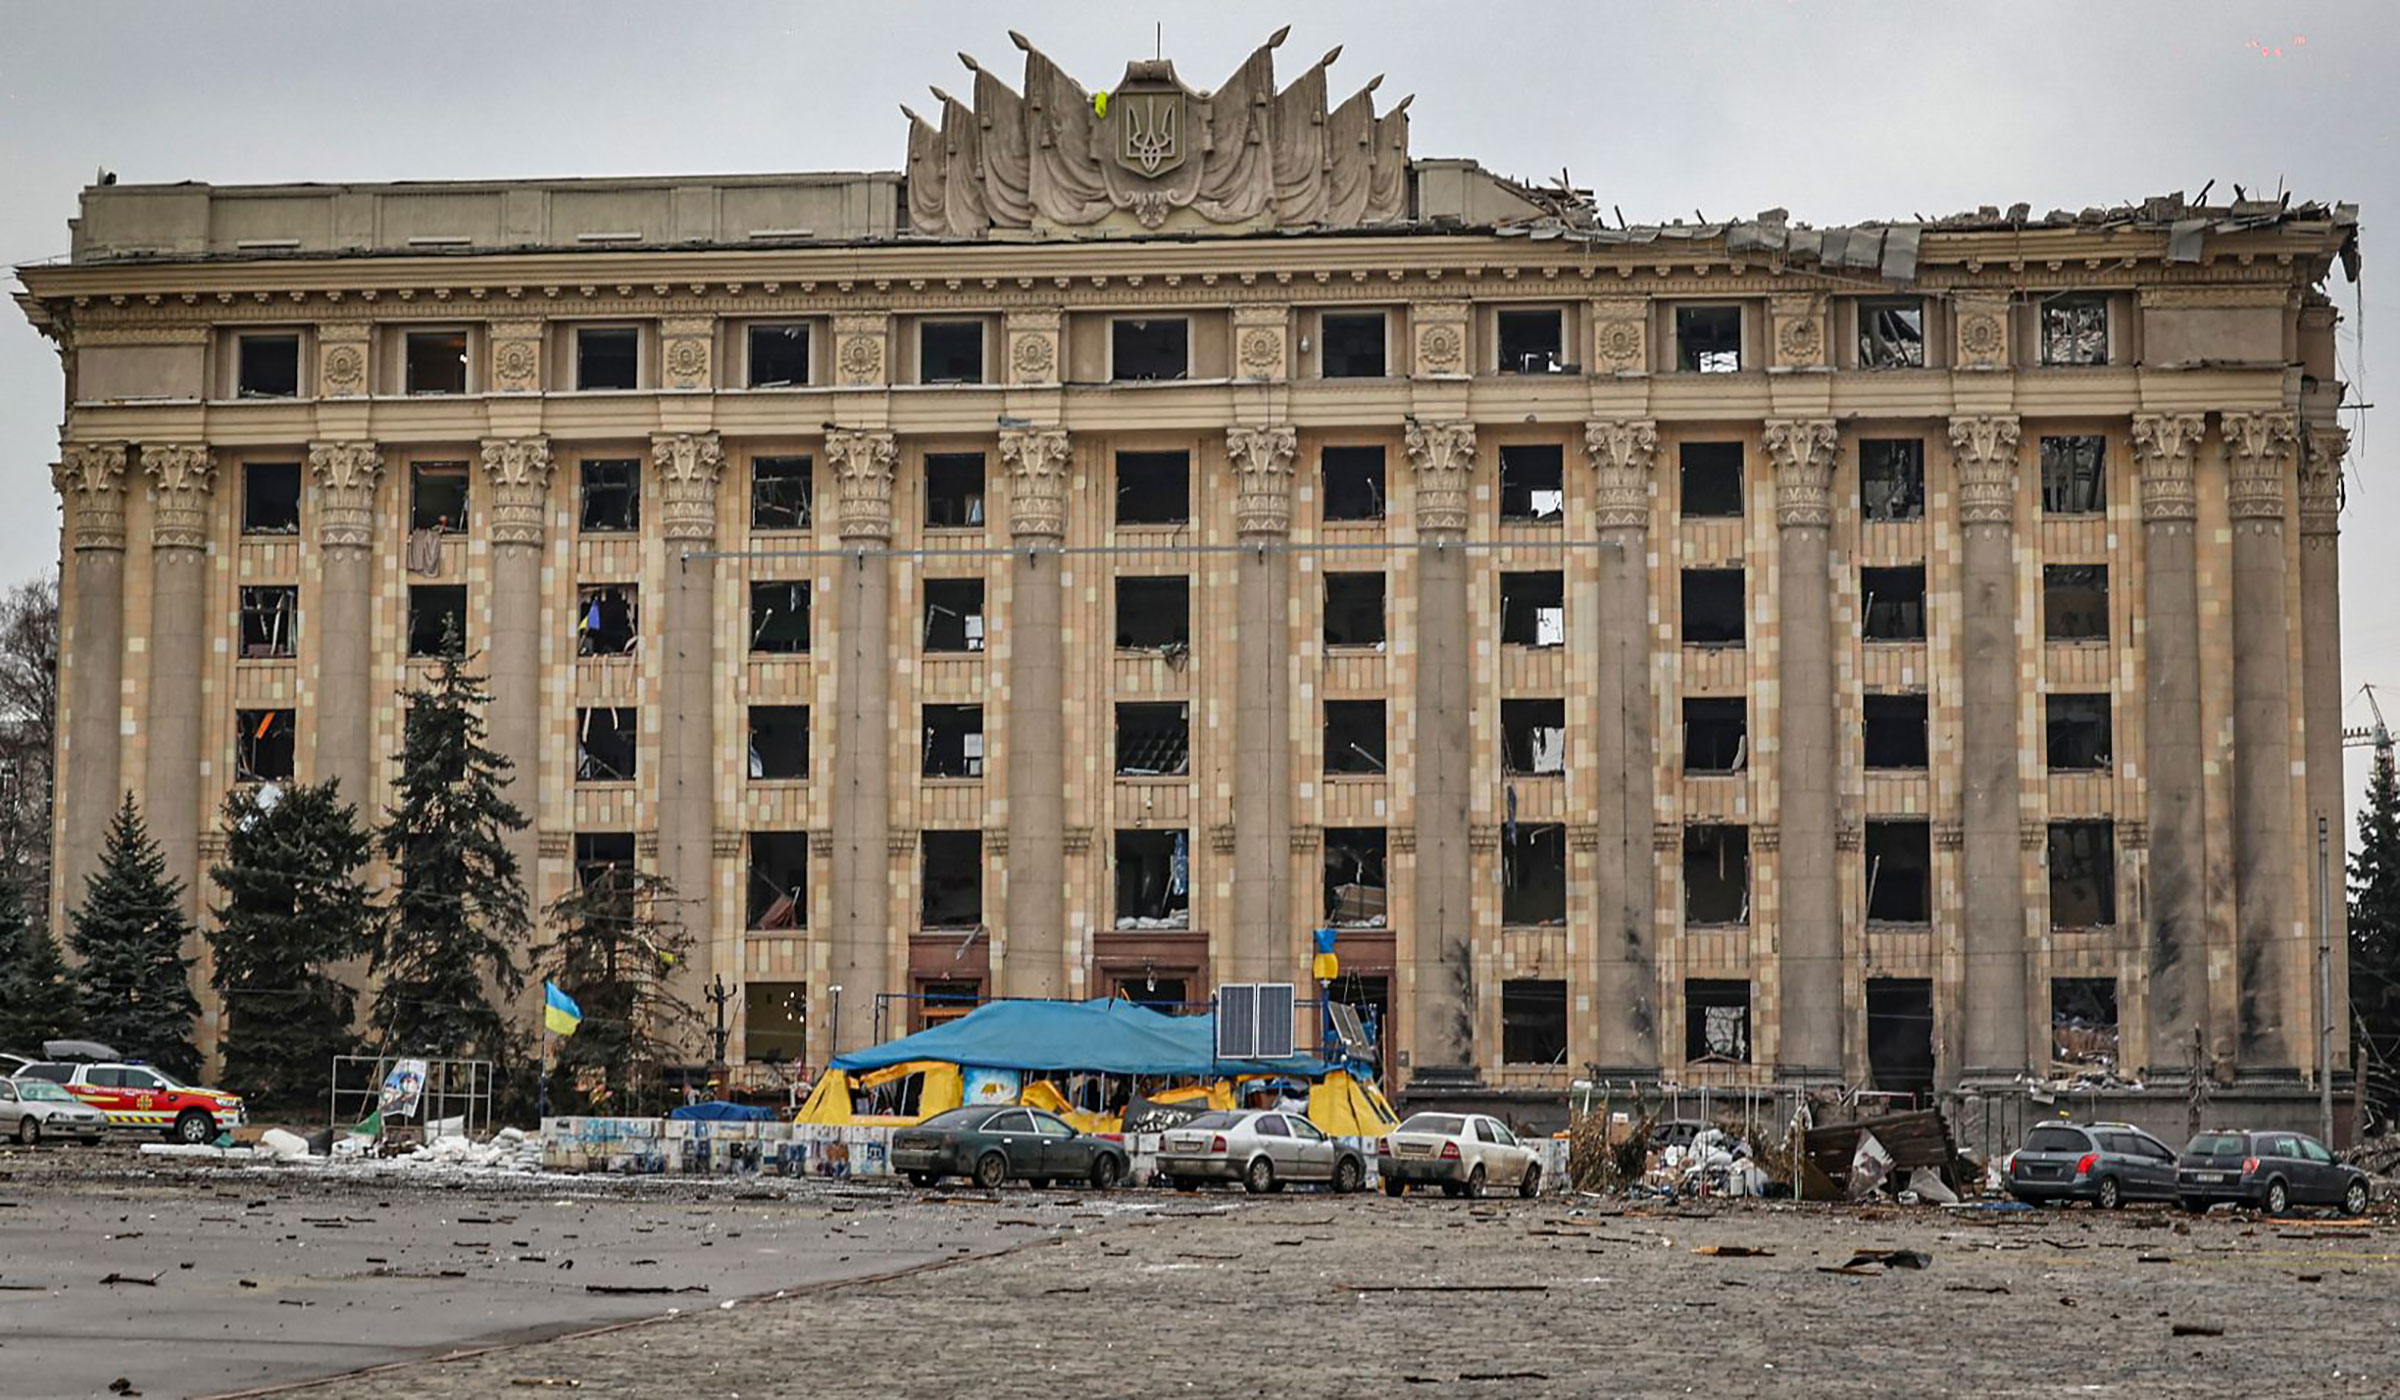 A damaged administrative building in the aftermath of a Russian shelling in downtown Kharkiv on March 1. (Sergey Kozlov—EPA-EFE/Shutterstock)